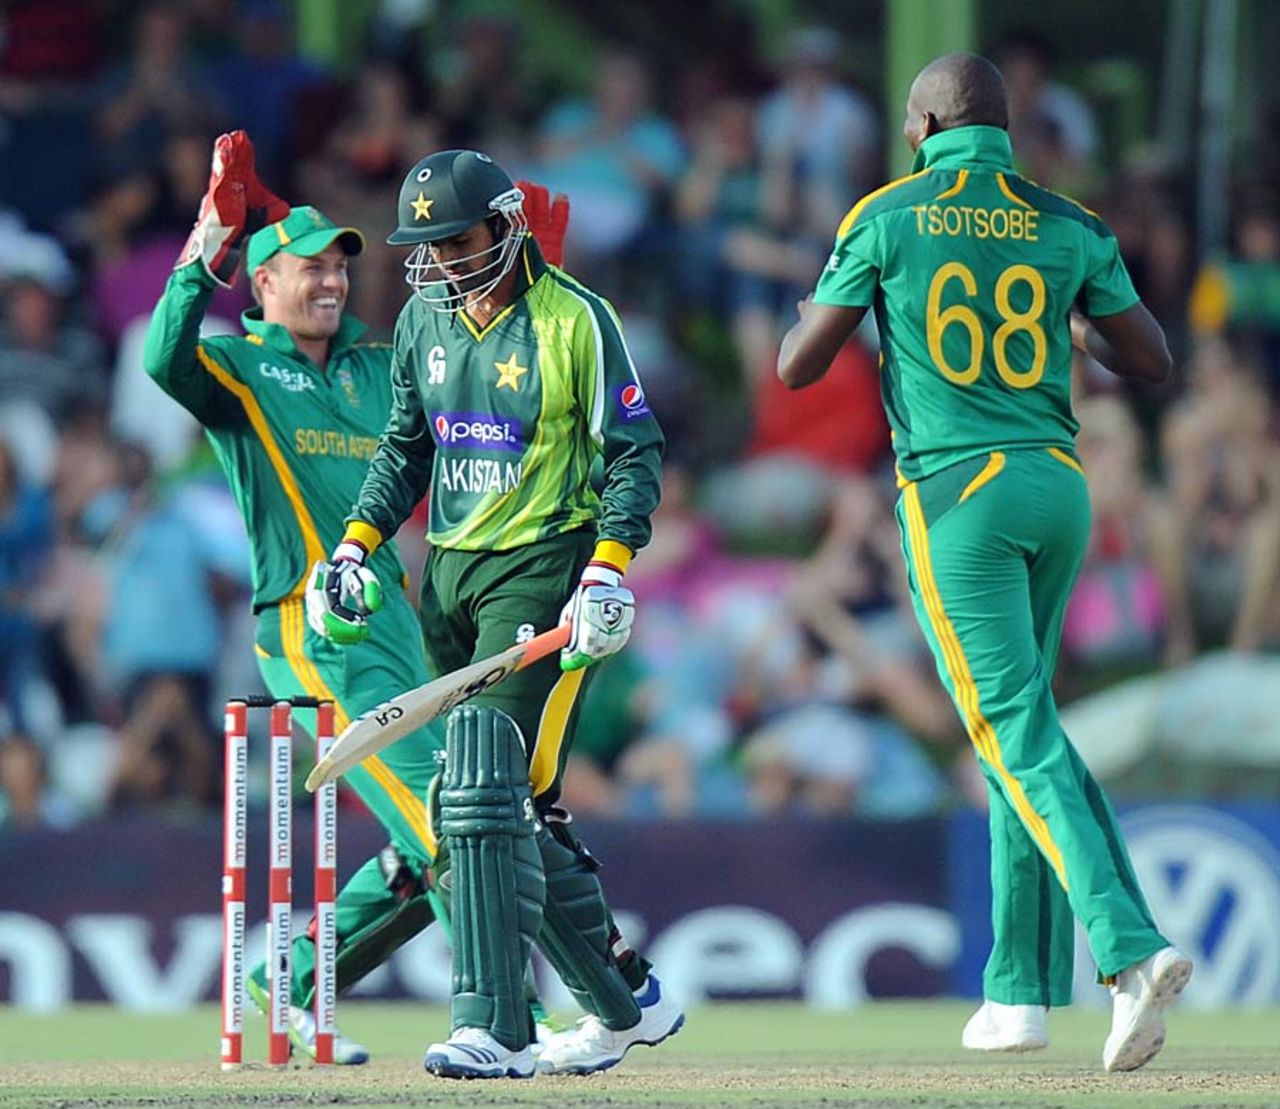 South Africans are delighted after the wicket of Shoaib Malik, South Africa v Pakistan, 1st ODI, Bloemfontein, March 10, 2013